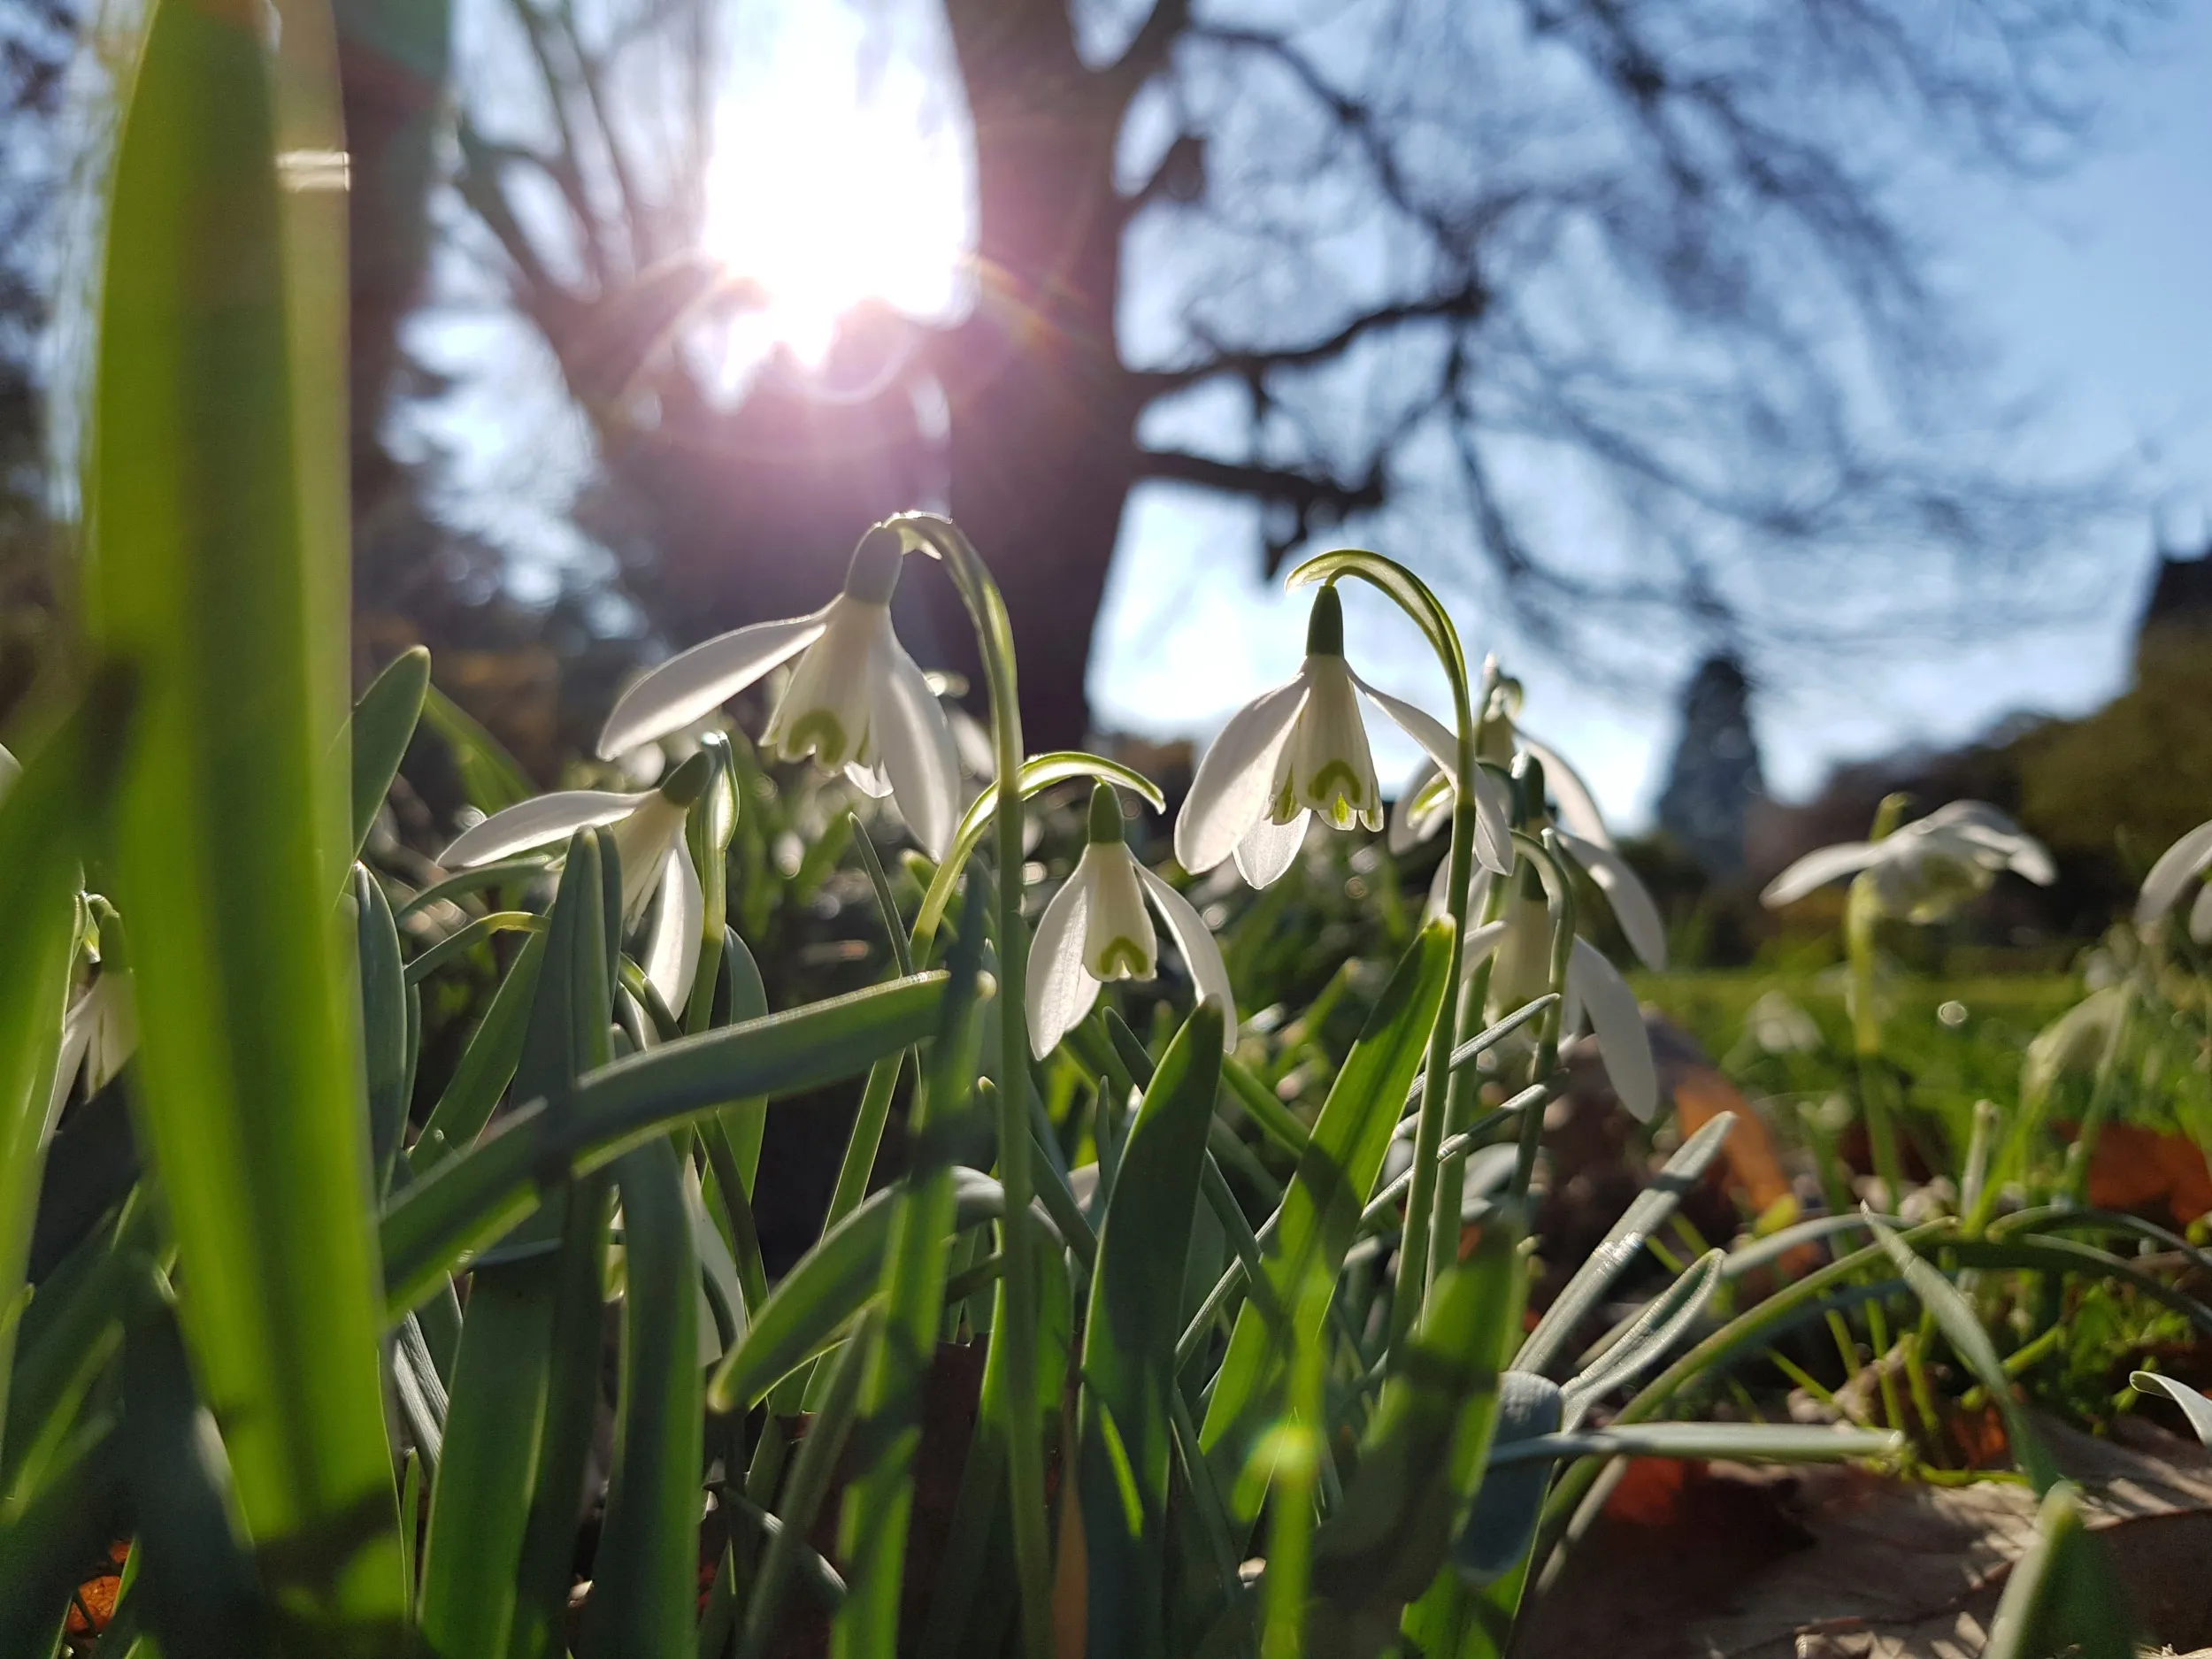 A cluster of Snowdrops on a bright winter morning.